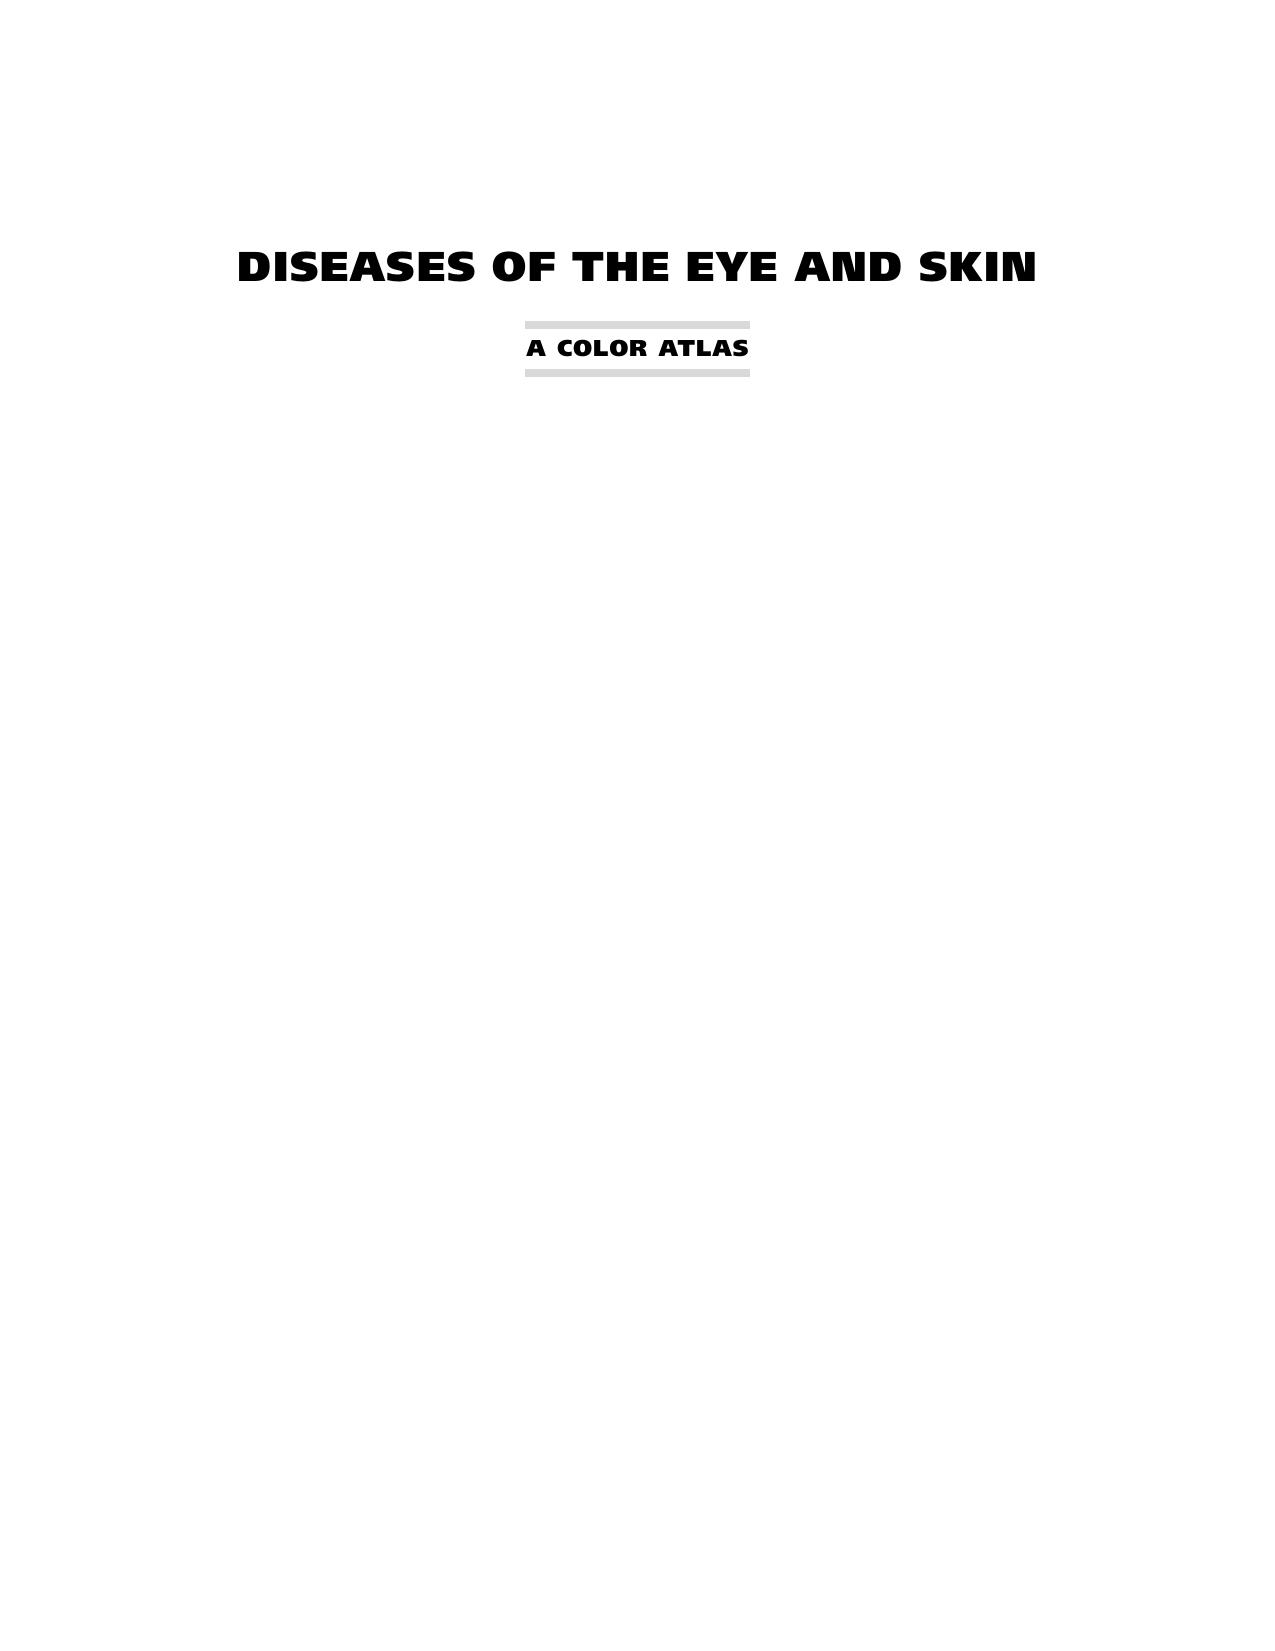 Diseases of the Eye and Skin : A Color Atlas